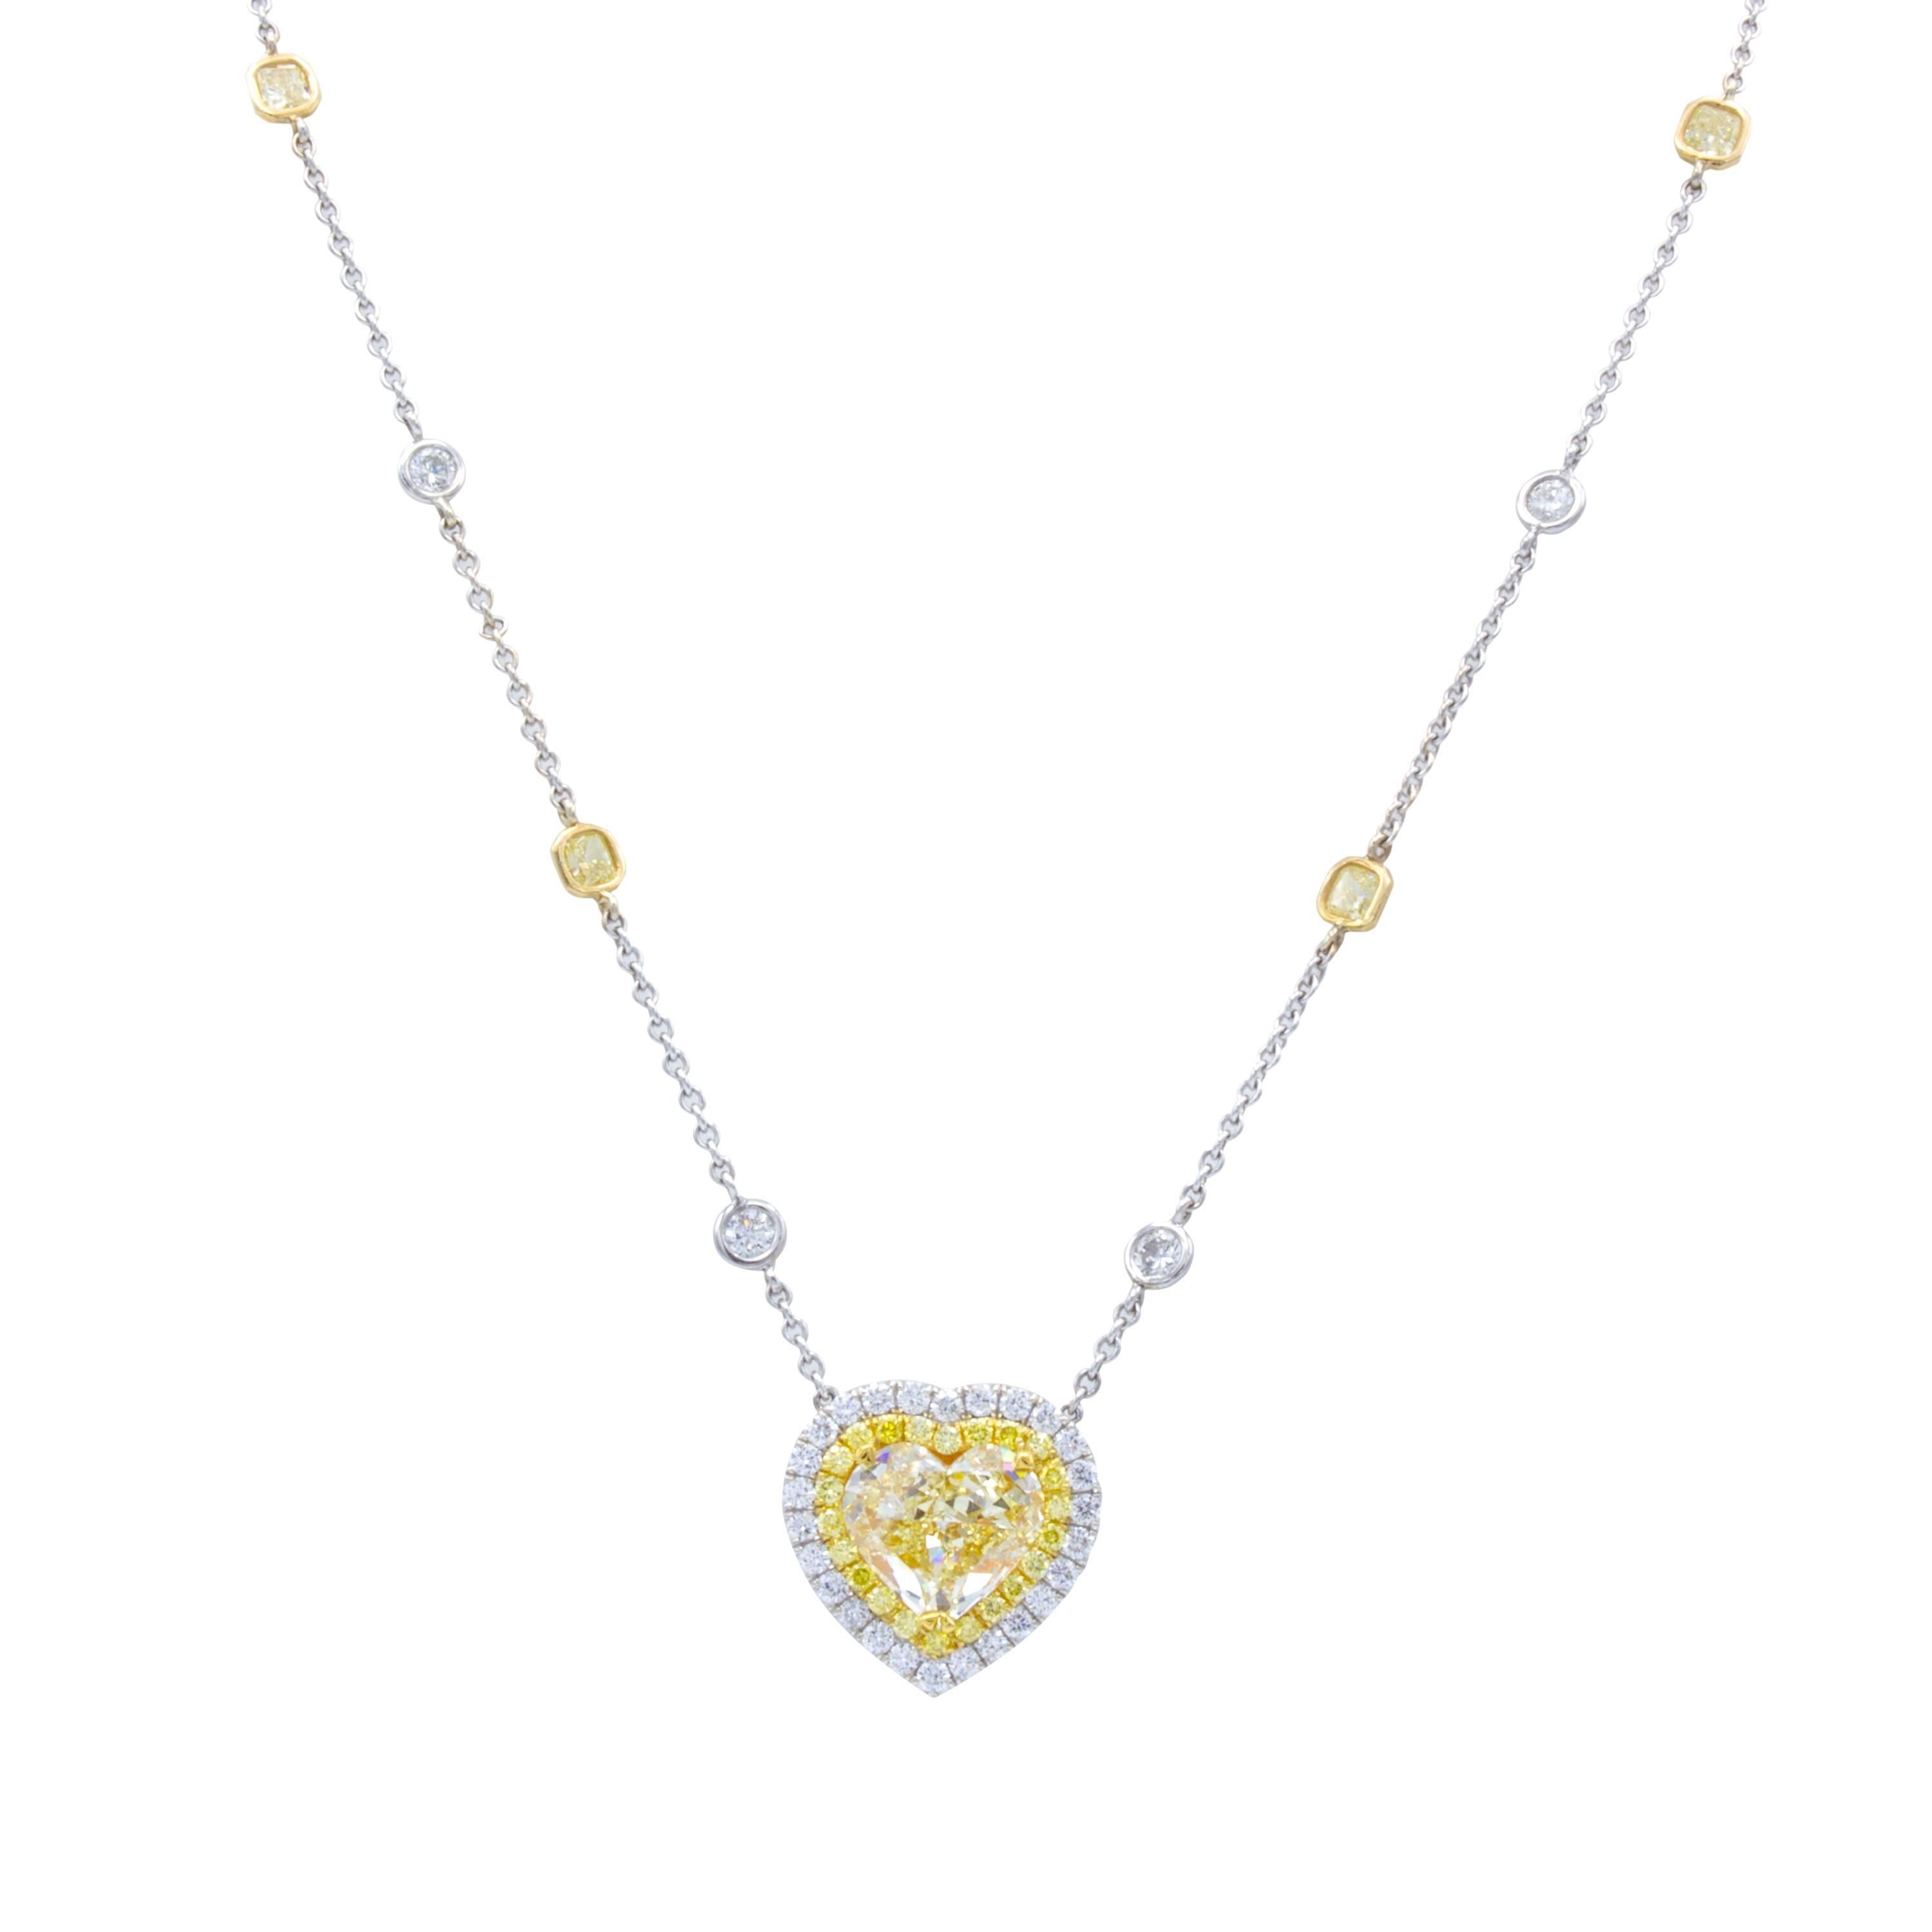 A sentimental masterpiece from Rosenberg Diamonds & Co. This beautiful heart shaped diamond pendant necklace sparkles with a GIA certified 3.97 carat natural fancy light yellow diamond at center. All around the pendant, two row of glistening pave